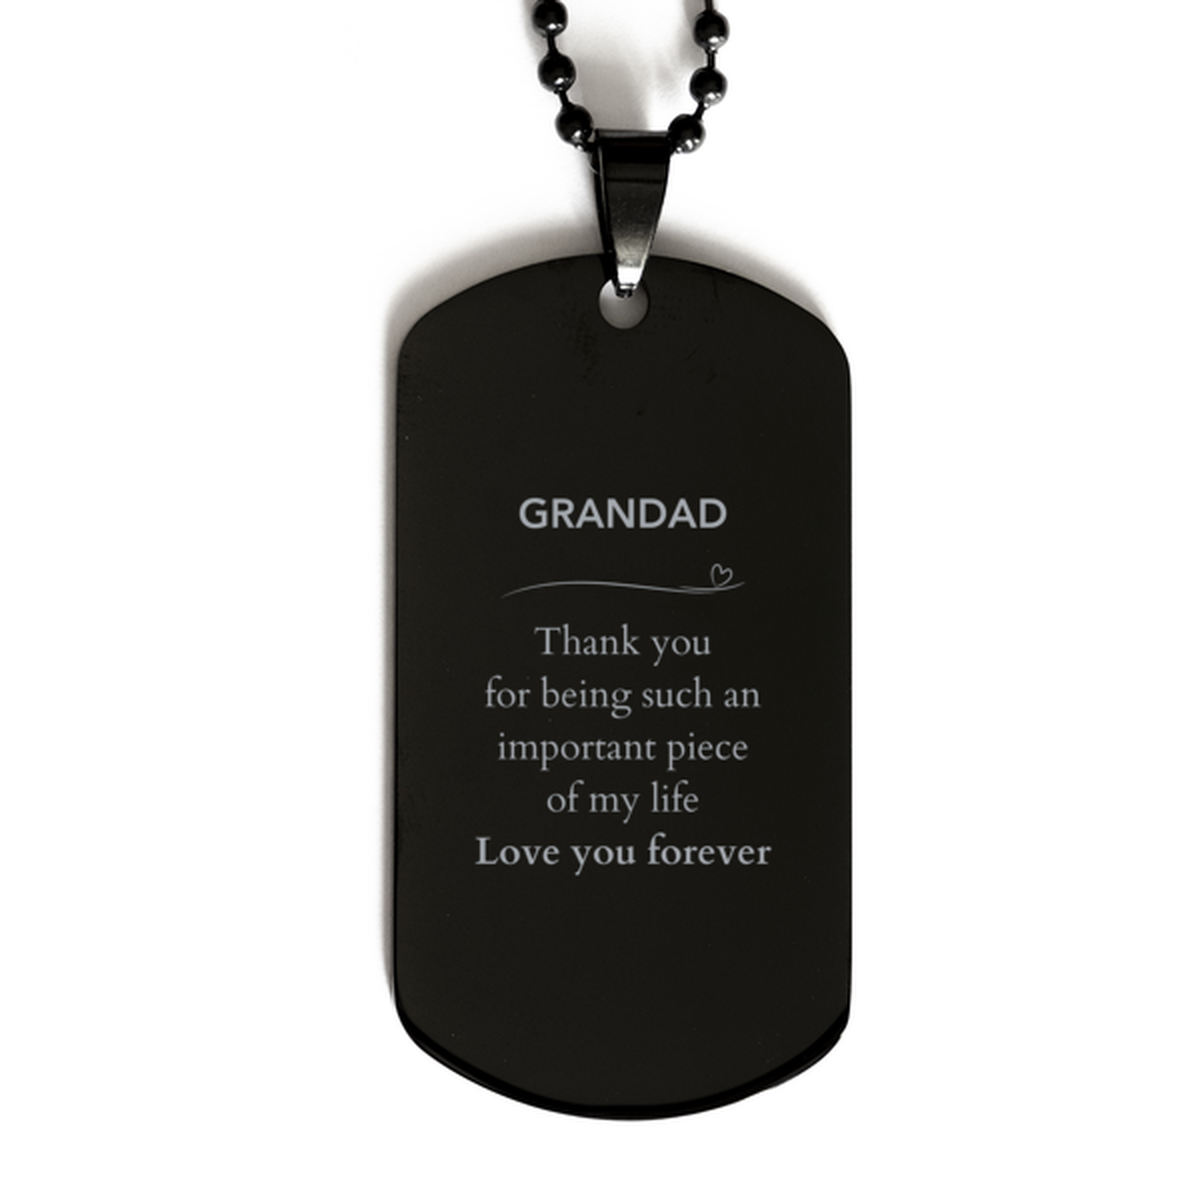 Appropriate Grandad Black Dog Tag Epic Birthday Gifts for Grandad Thank you for being such an important piece of my life Grandad Christmas Mothers Fathers Day